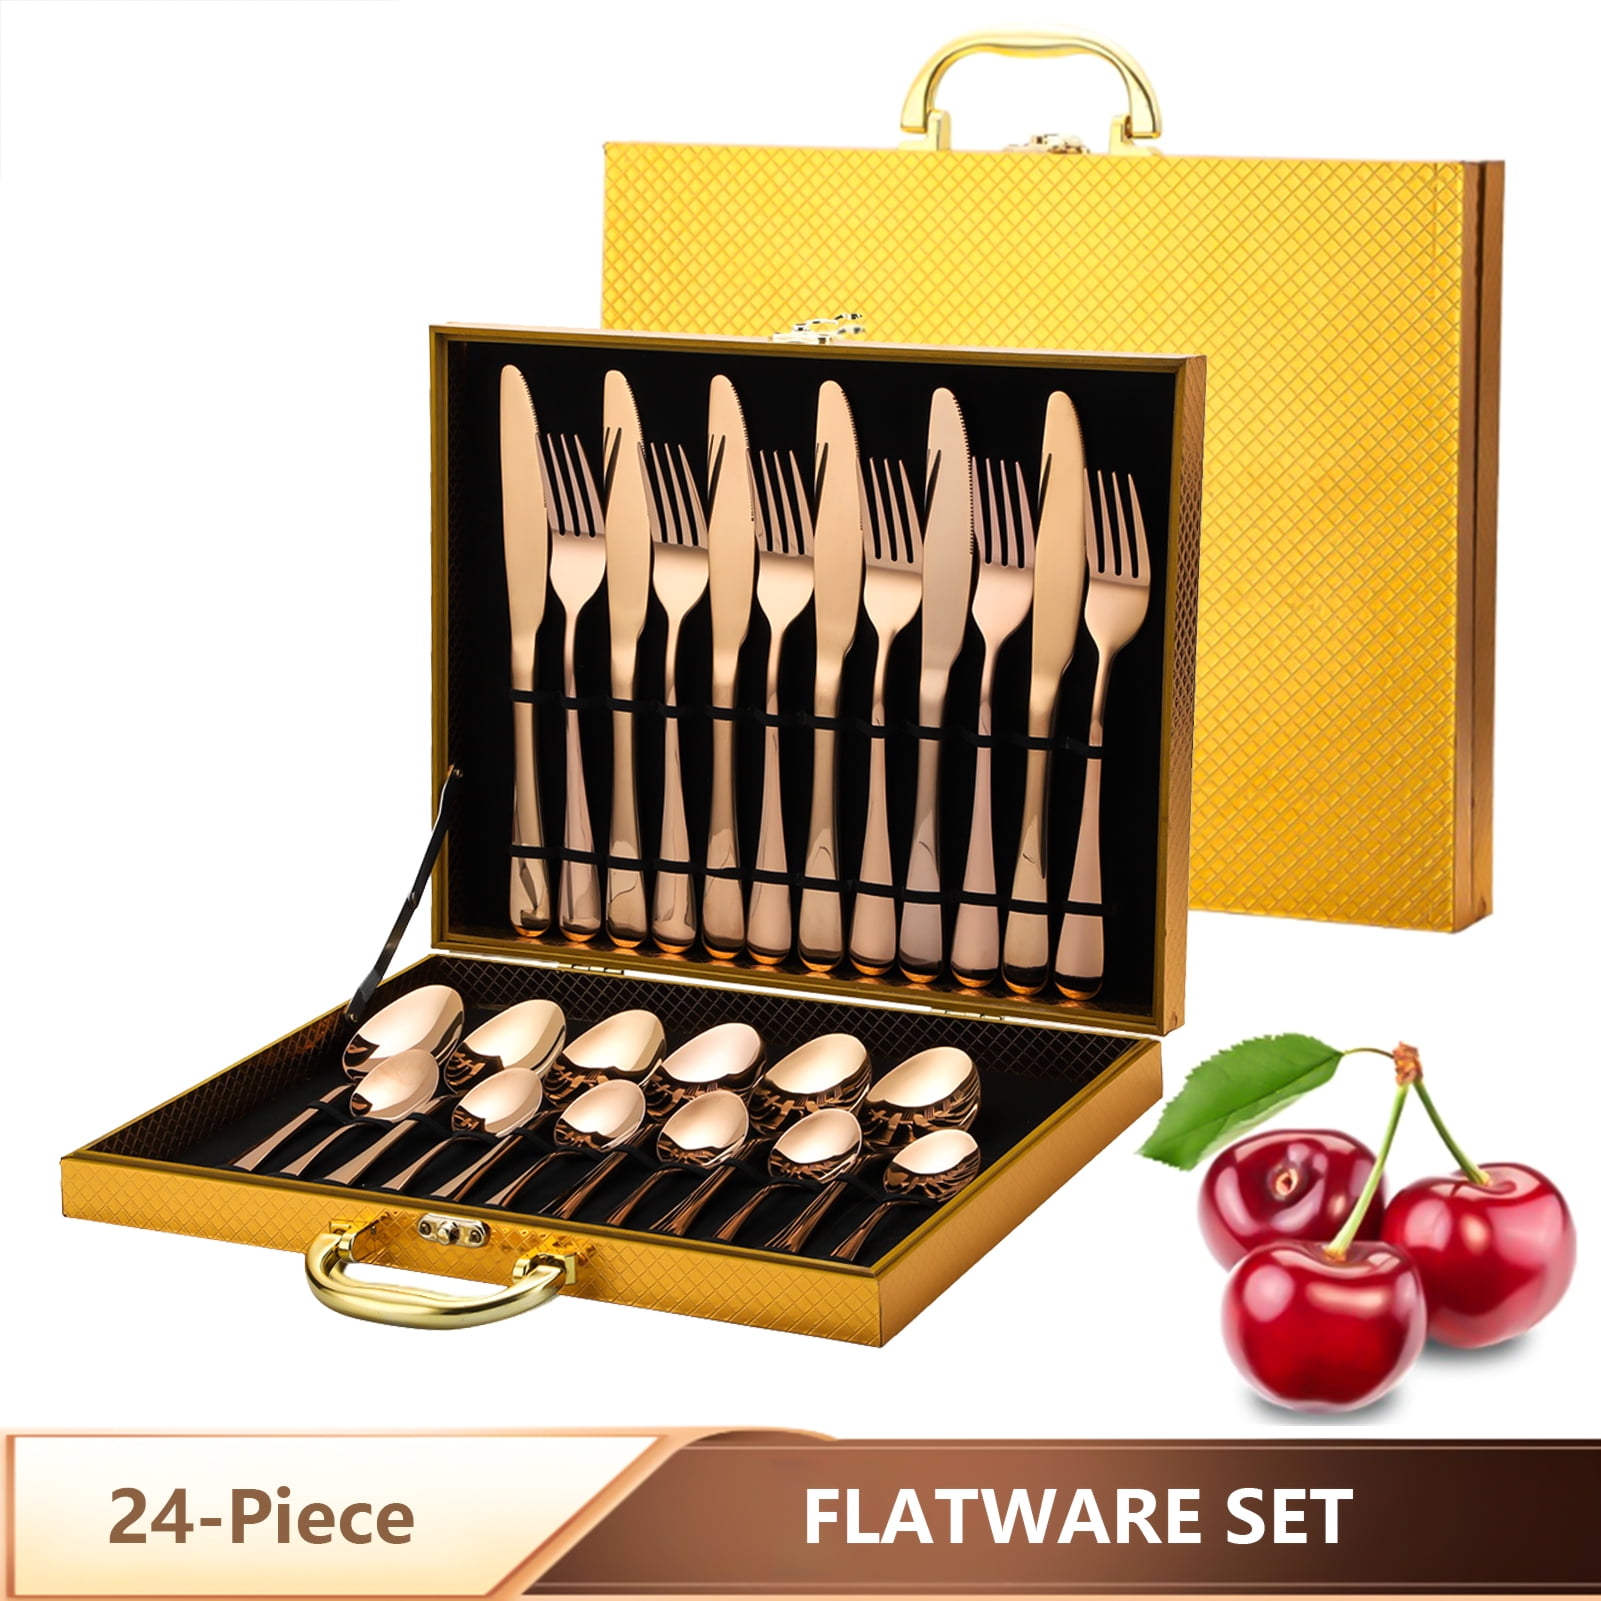 Hiware 24-Piece Silverware Set with Steak Knives, Morocco